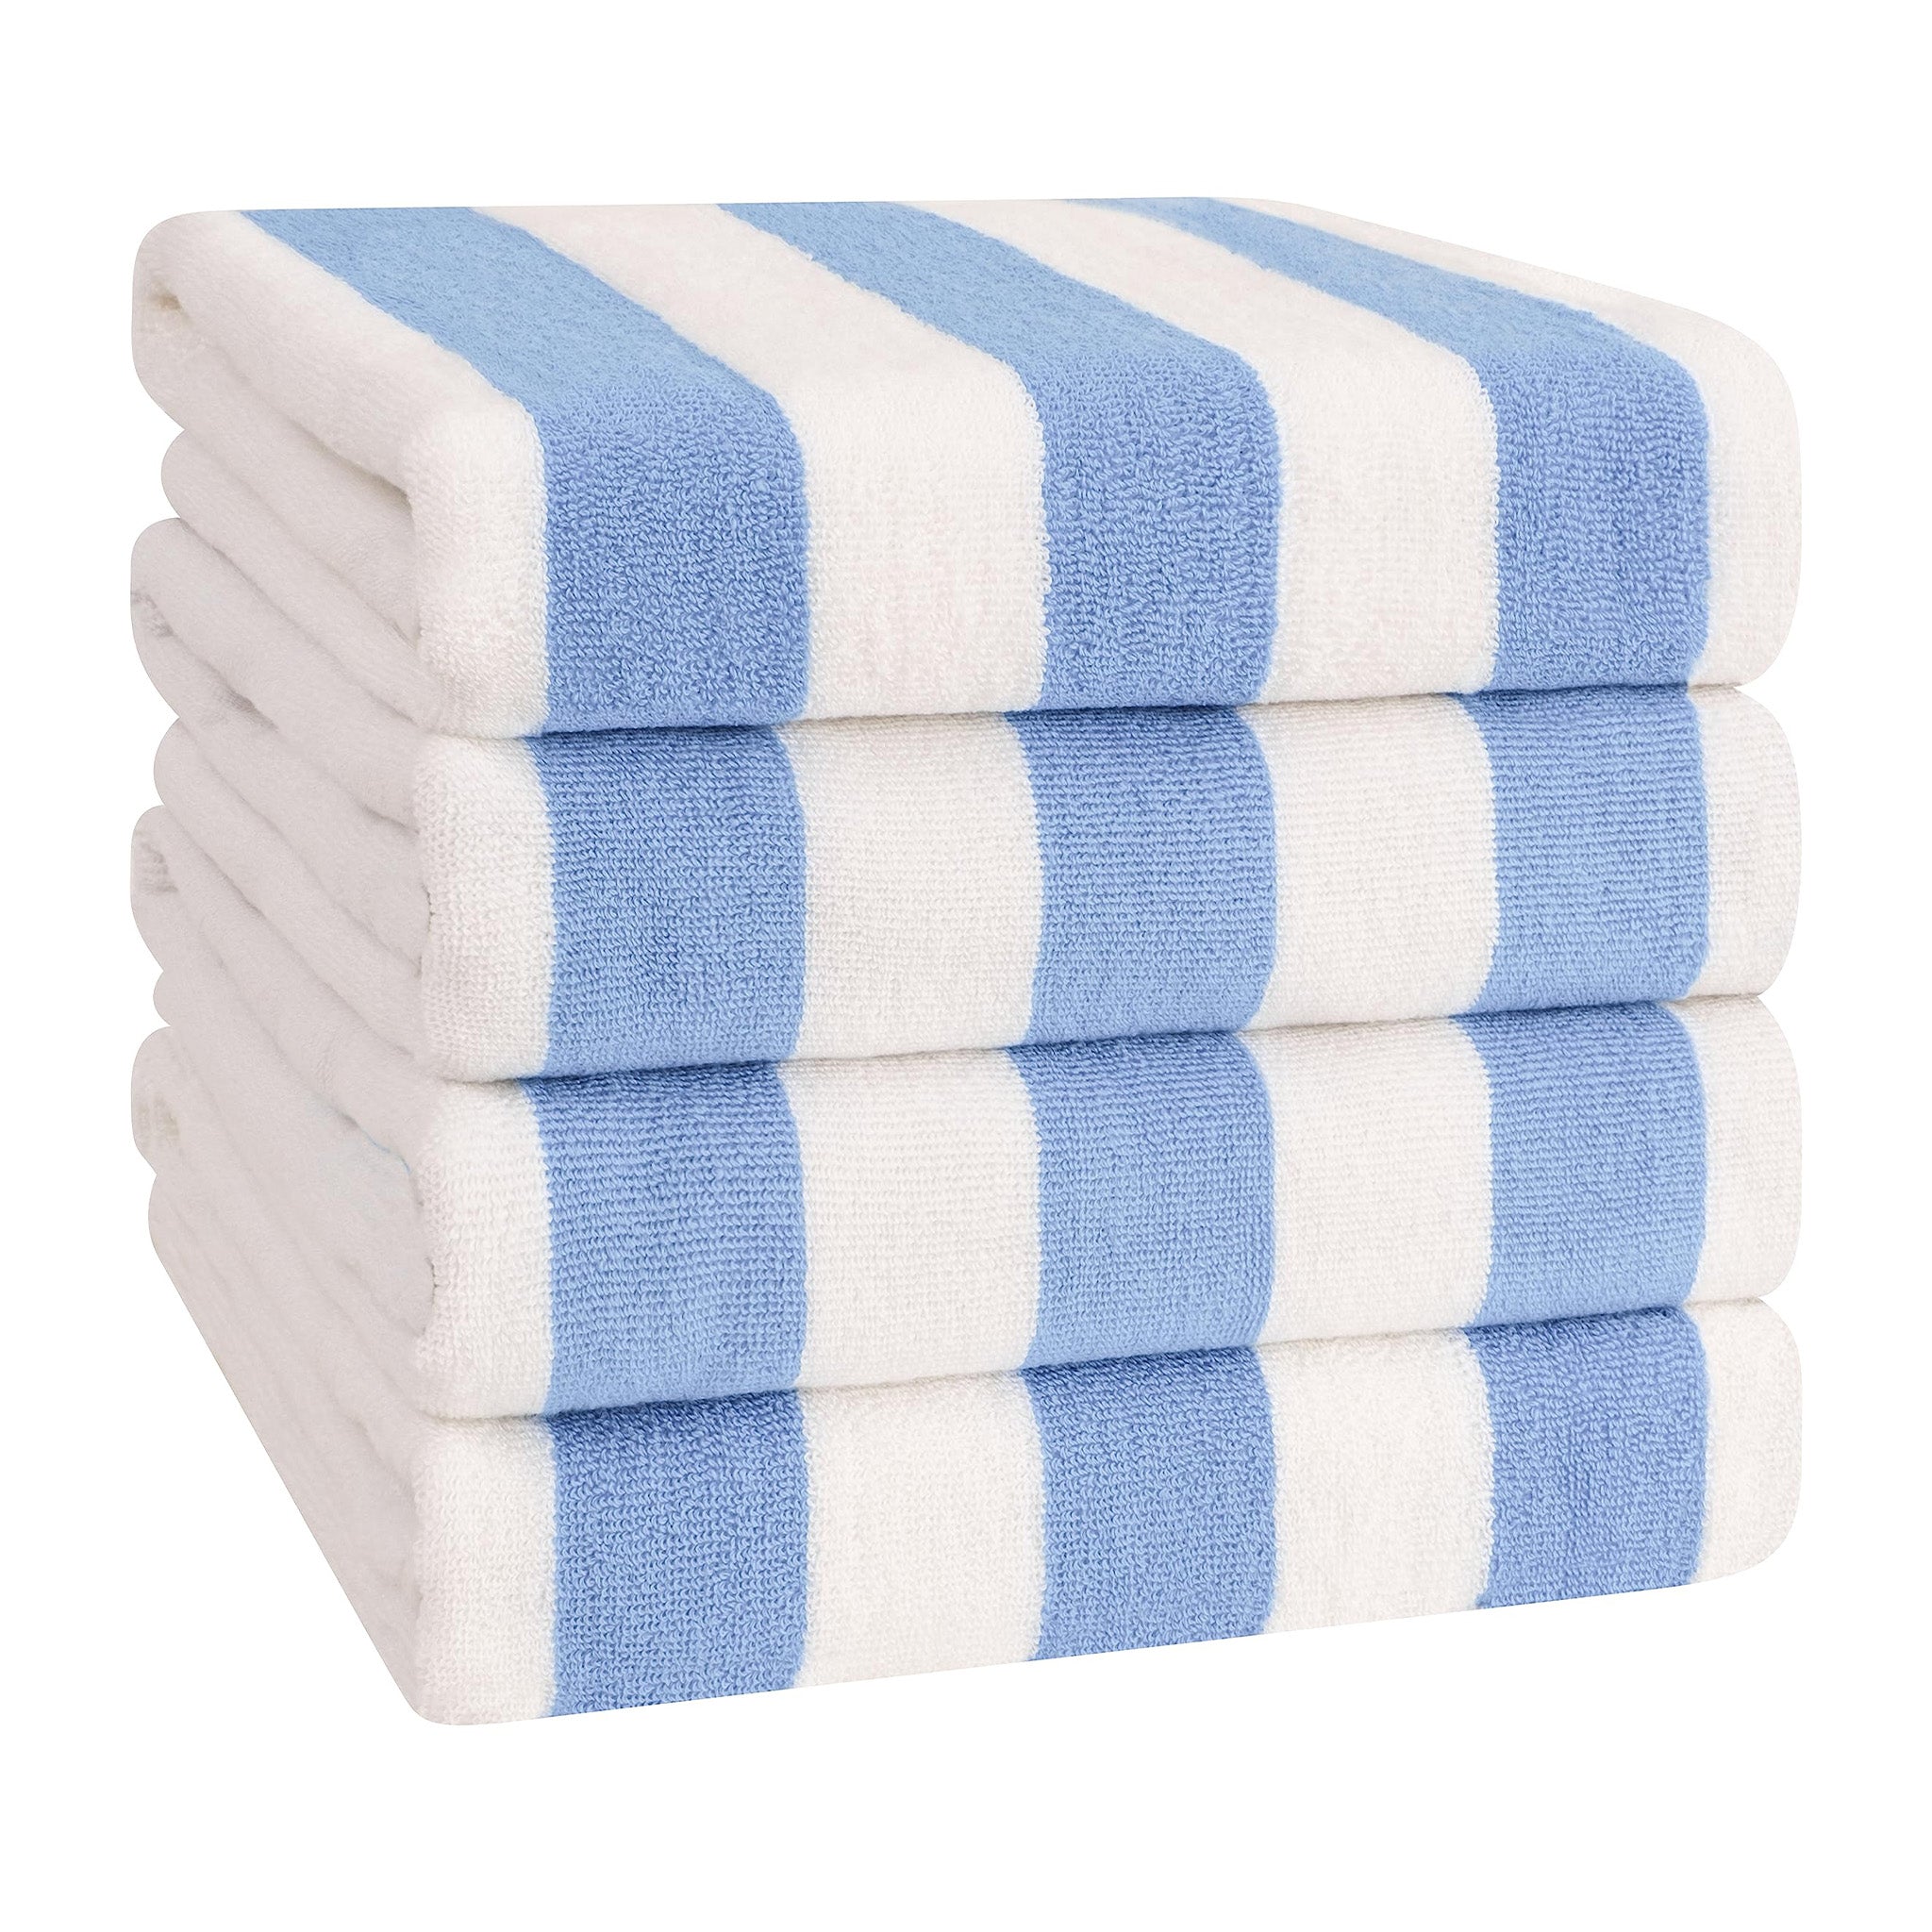 4 Pack Beach Towels, 100% Cotton Cabana Striped Pool Towels